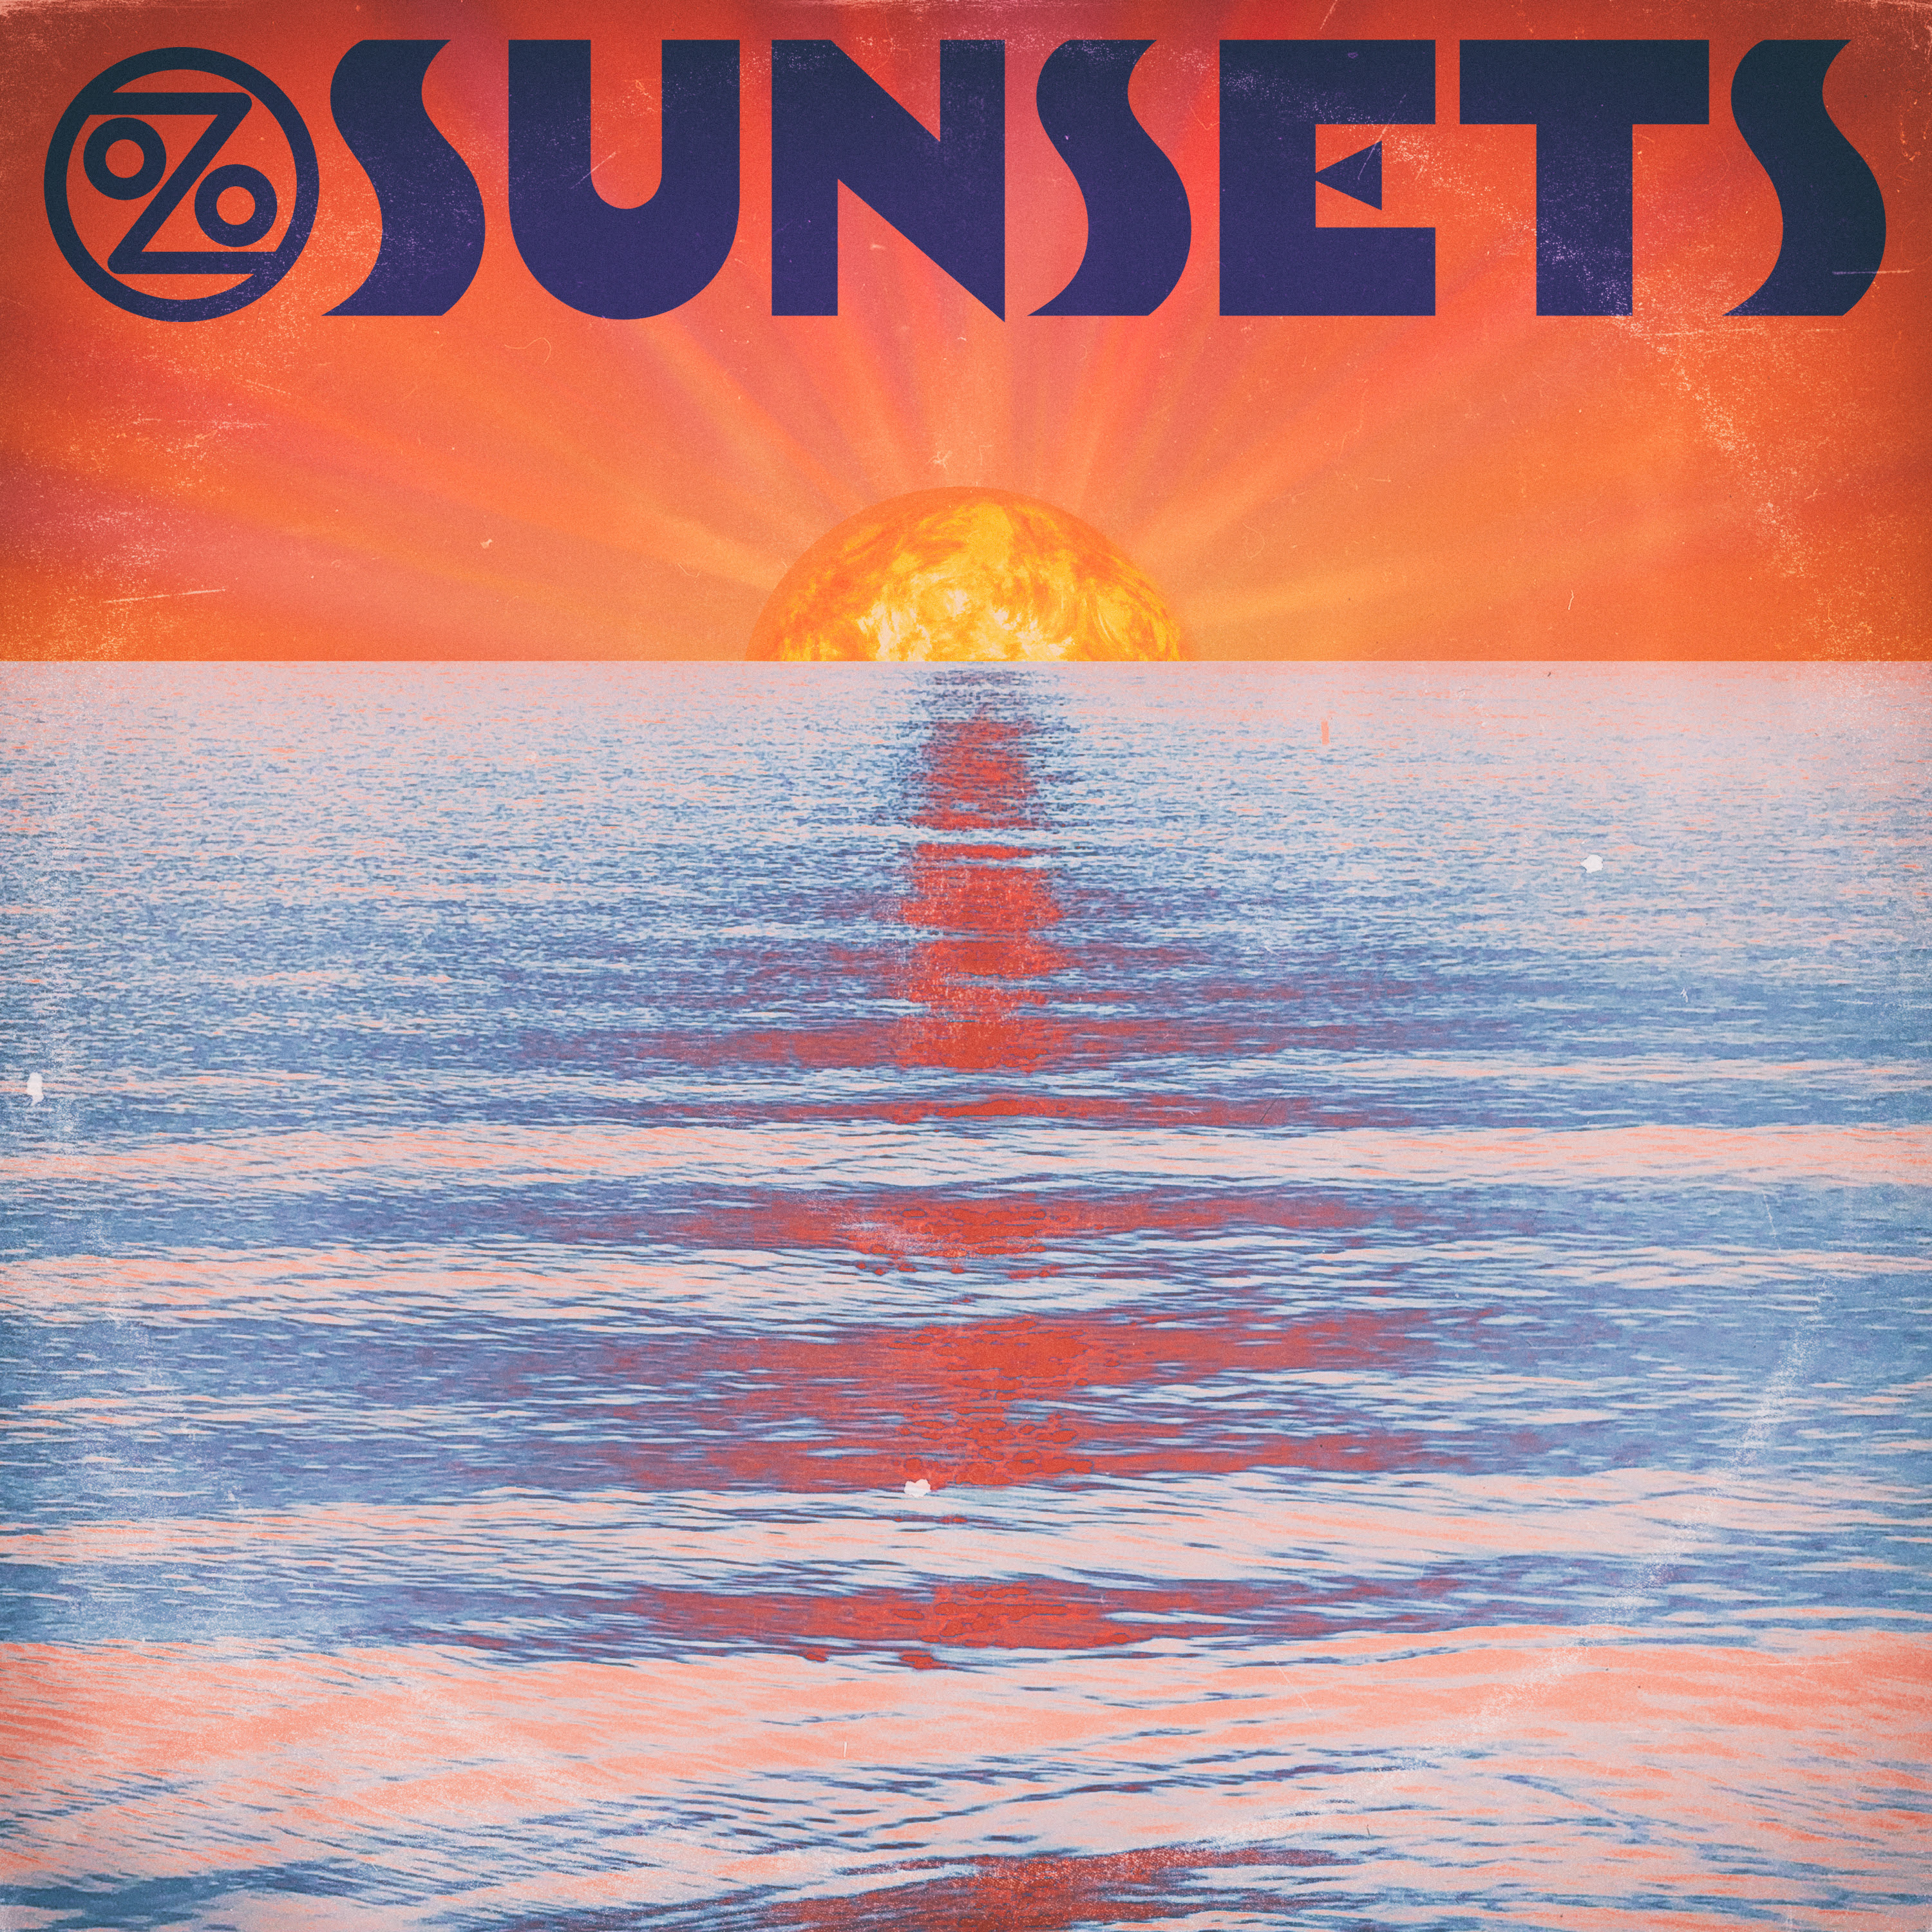 OZOMATLI Release "Sunsets" - Grammy Award Band's New Single Out Now!